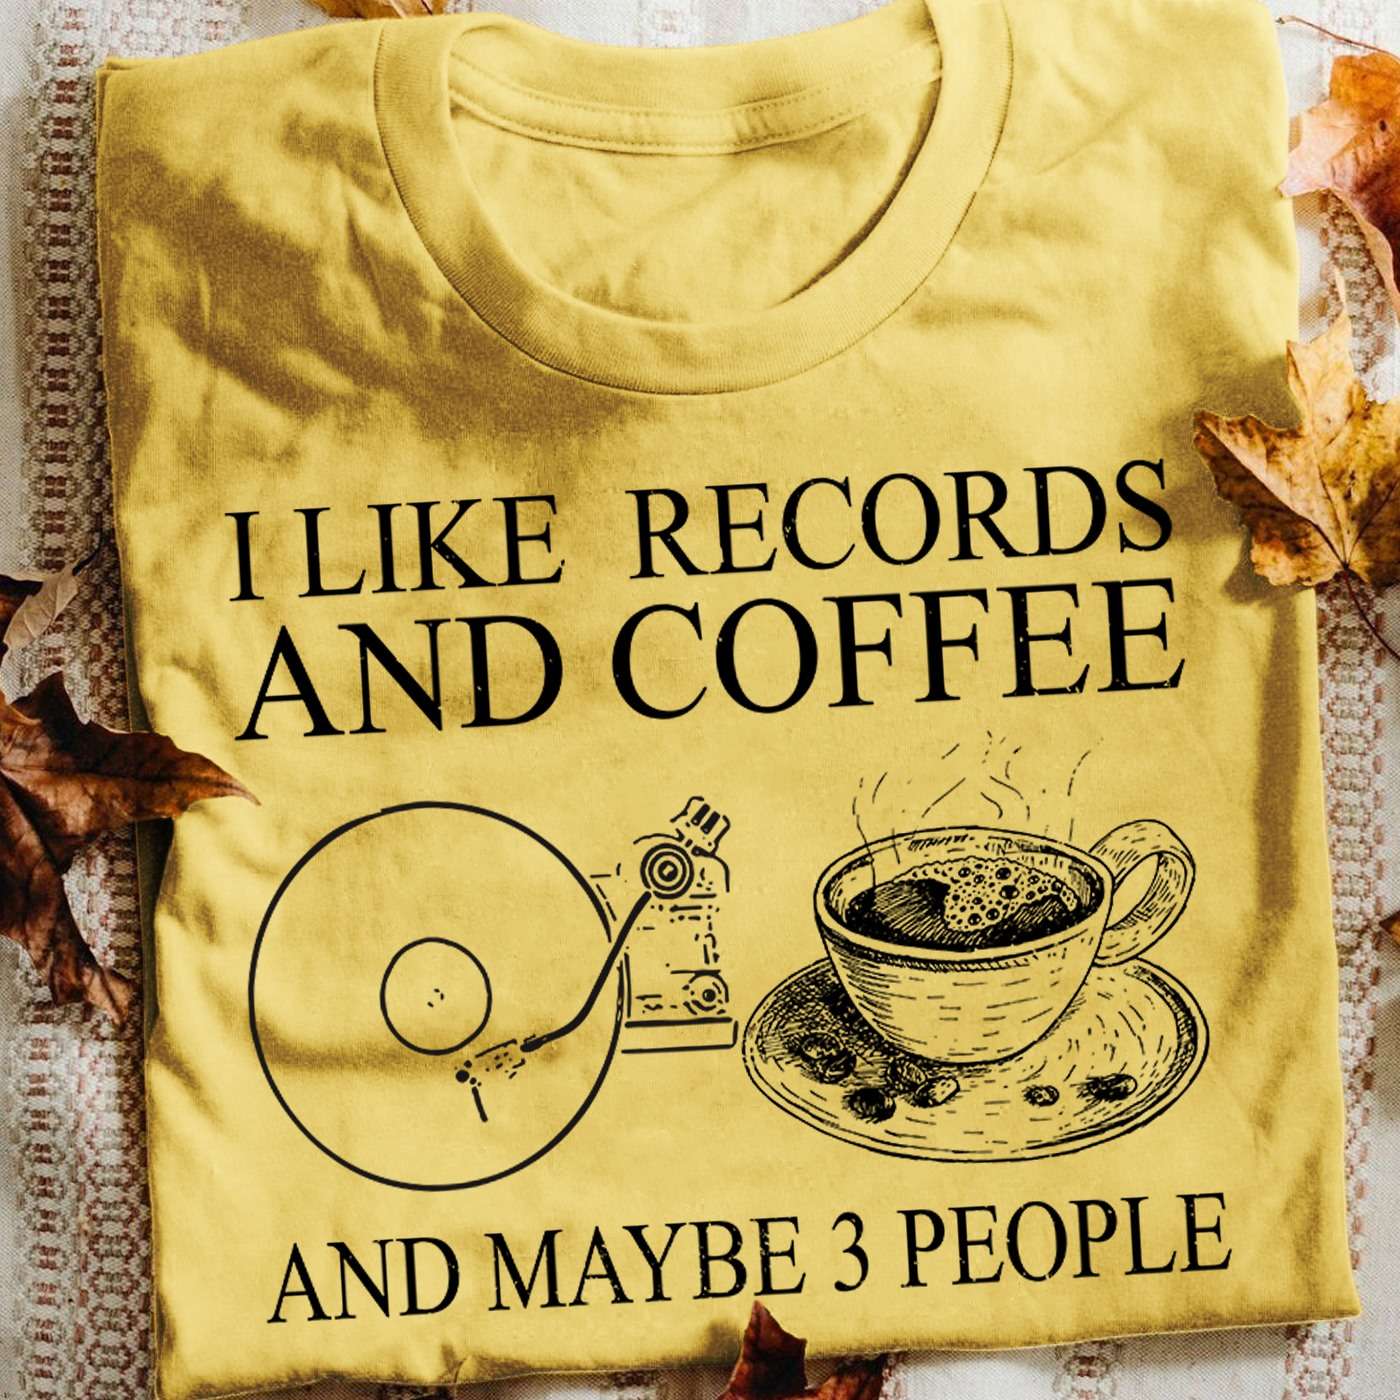 I like records and coffee and maybe 3 people - Vinyls record